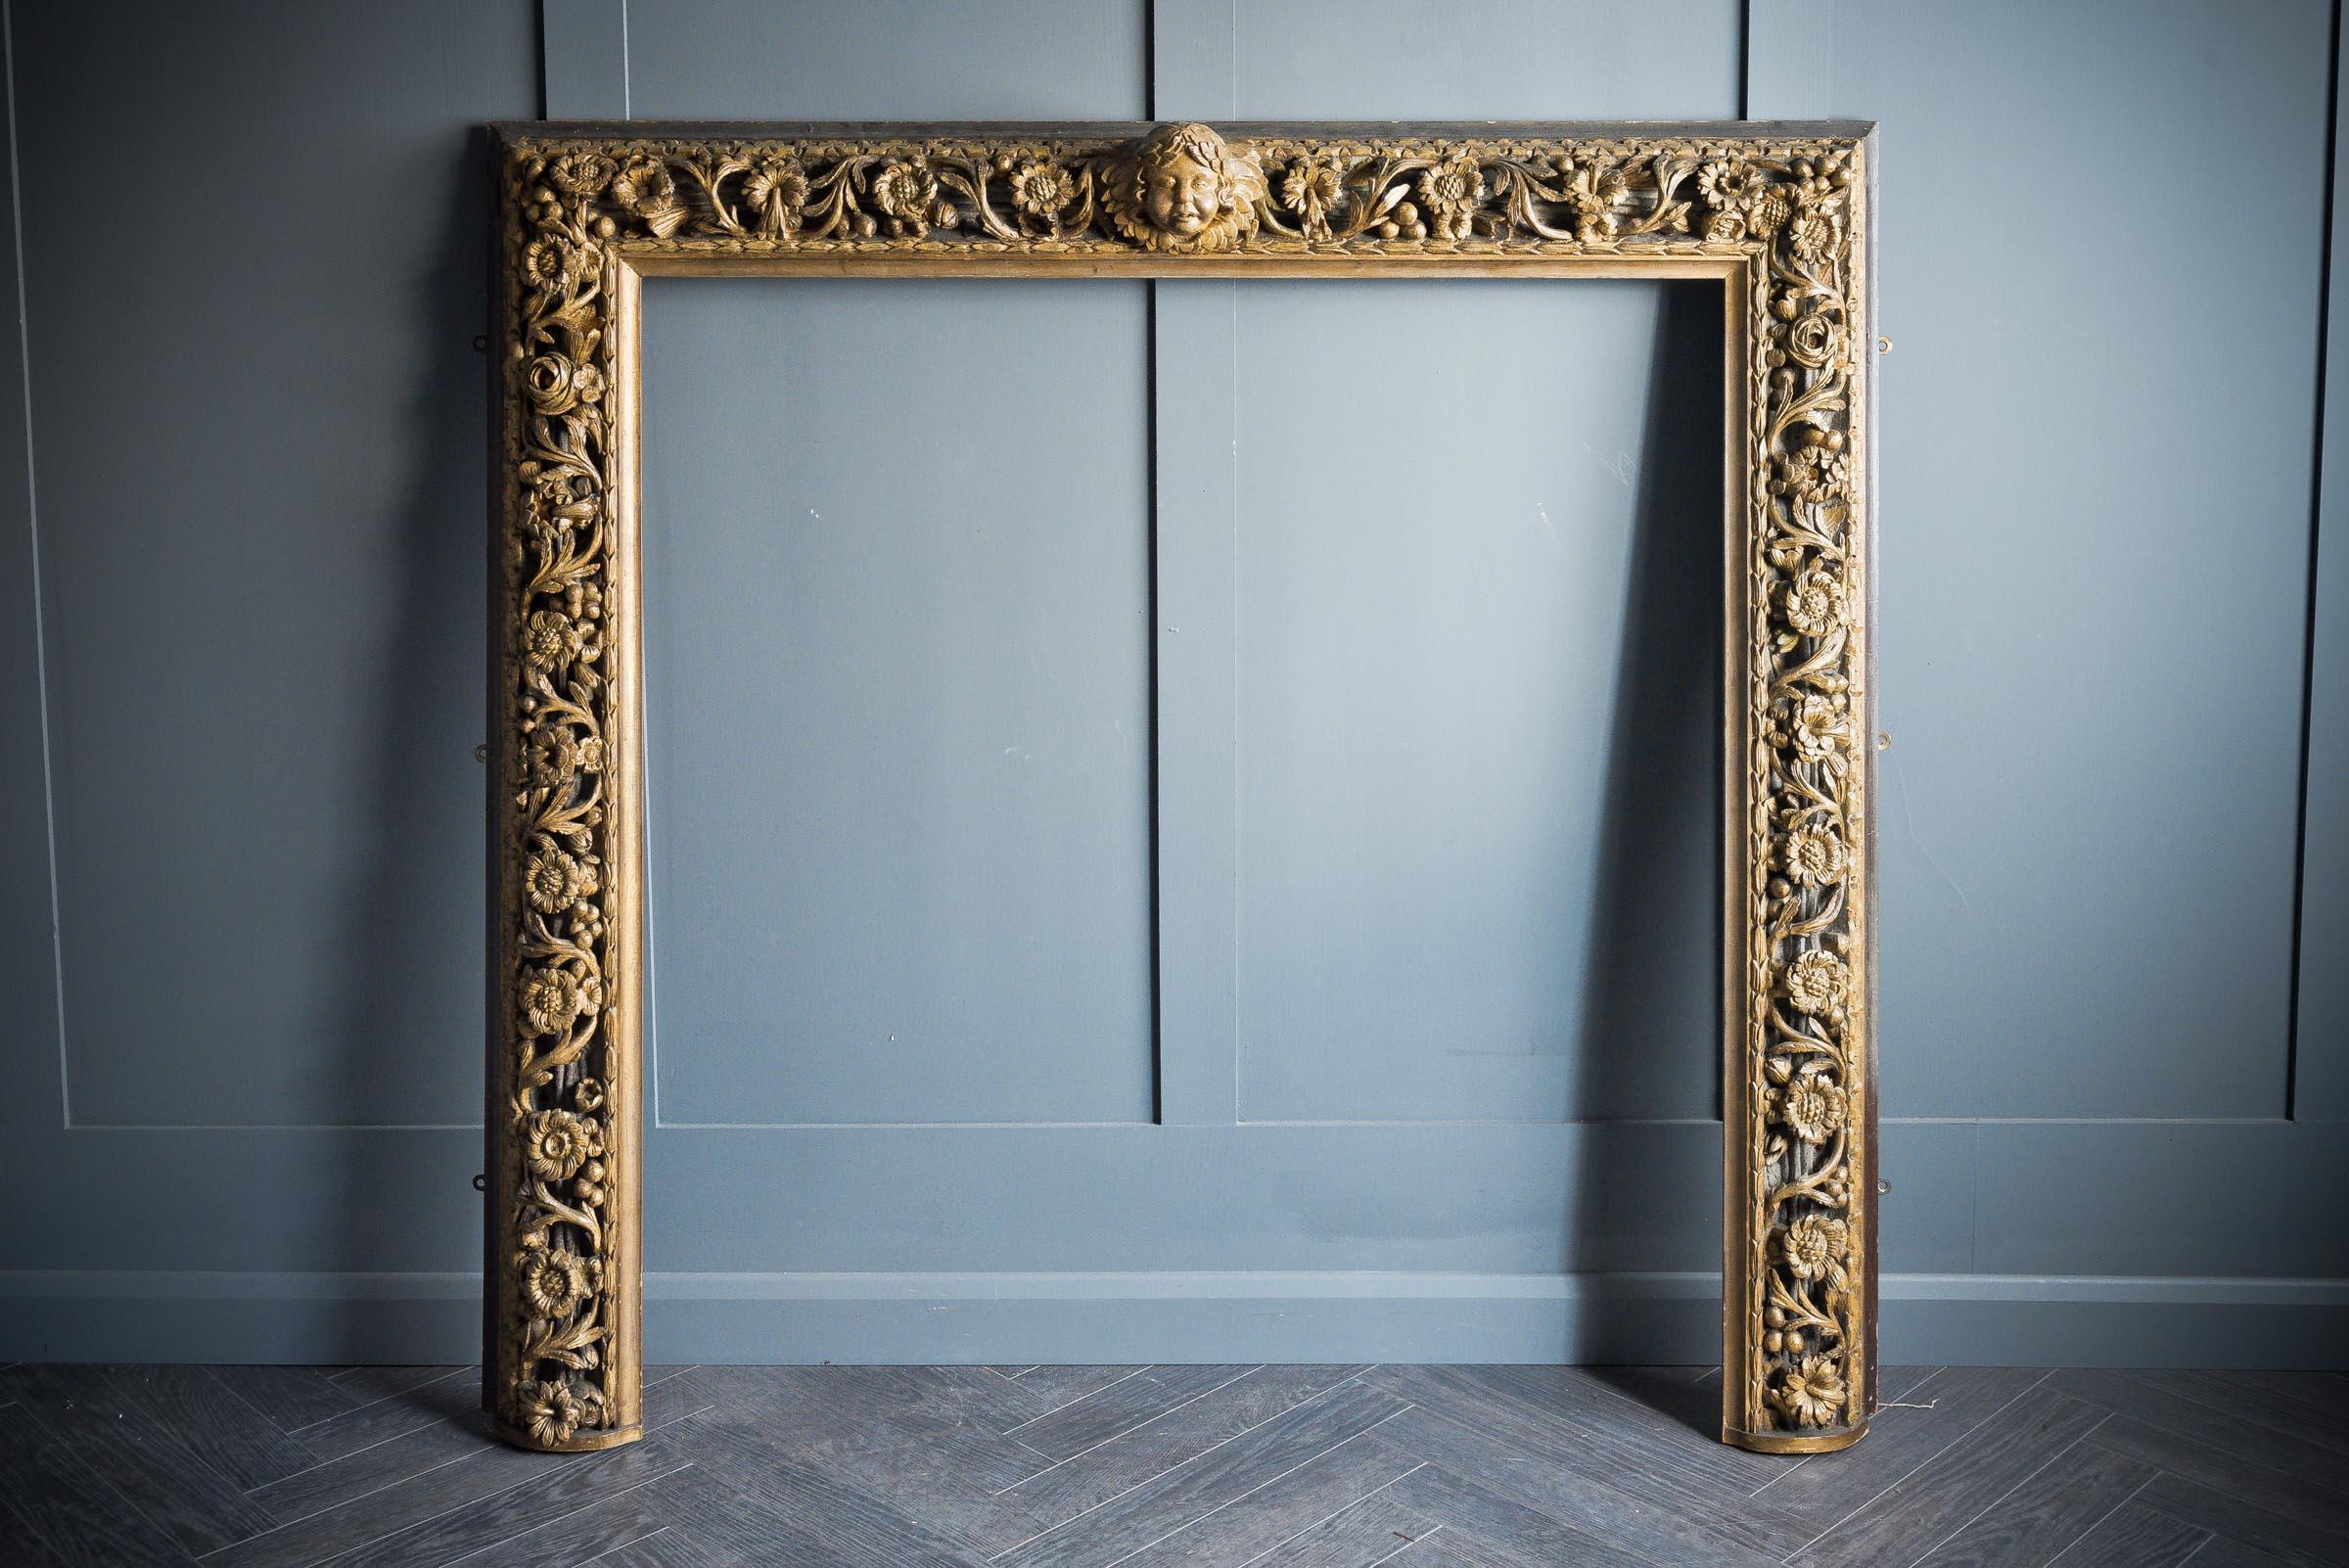 In the manner of Grinling Gibbons, a rare and beautifully hand carved worn gilt over Douglas Fir English overmantle and historically replaced foxed mirror with jade marble base plate, late 18th century in Douglas fir.